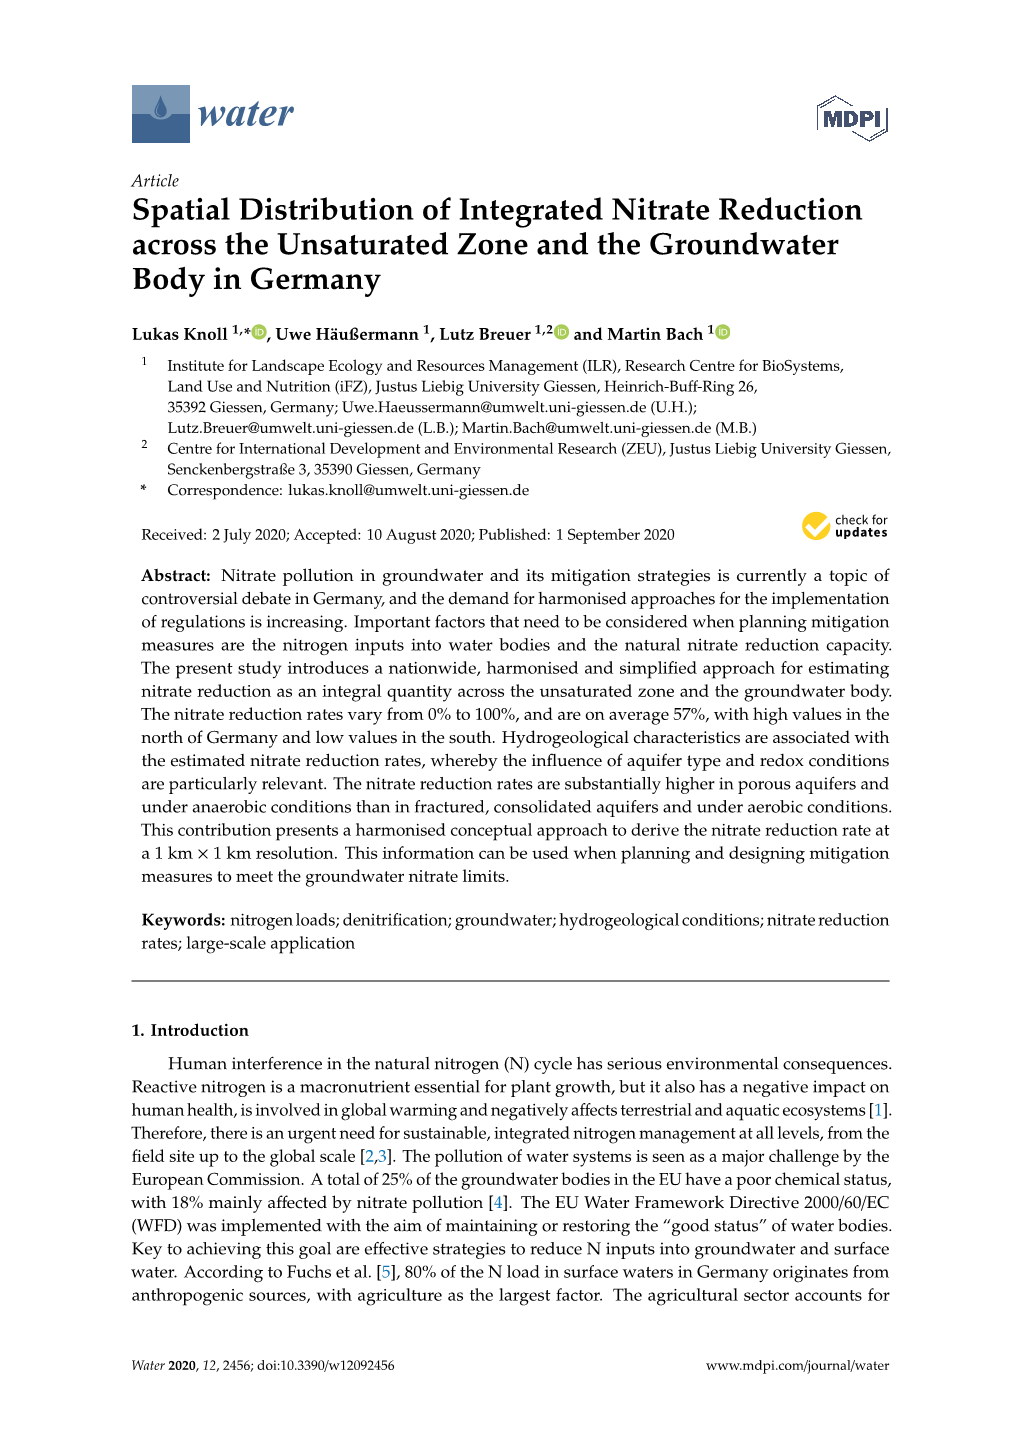 Spatial Distribution of Integrated Nitrate Reduction Across the Unsaturated Zone and the Groundwater Body in Germany